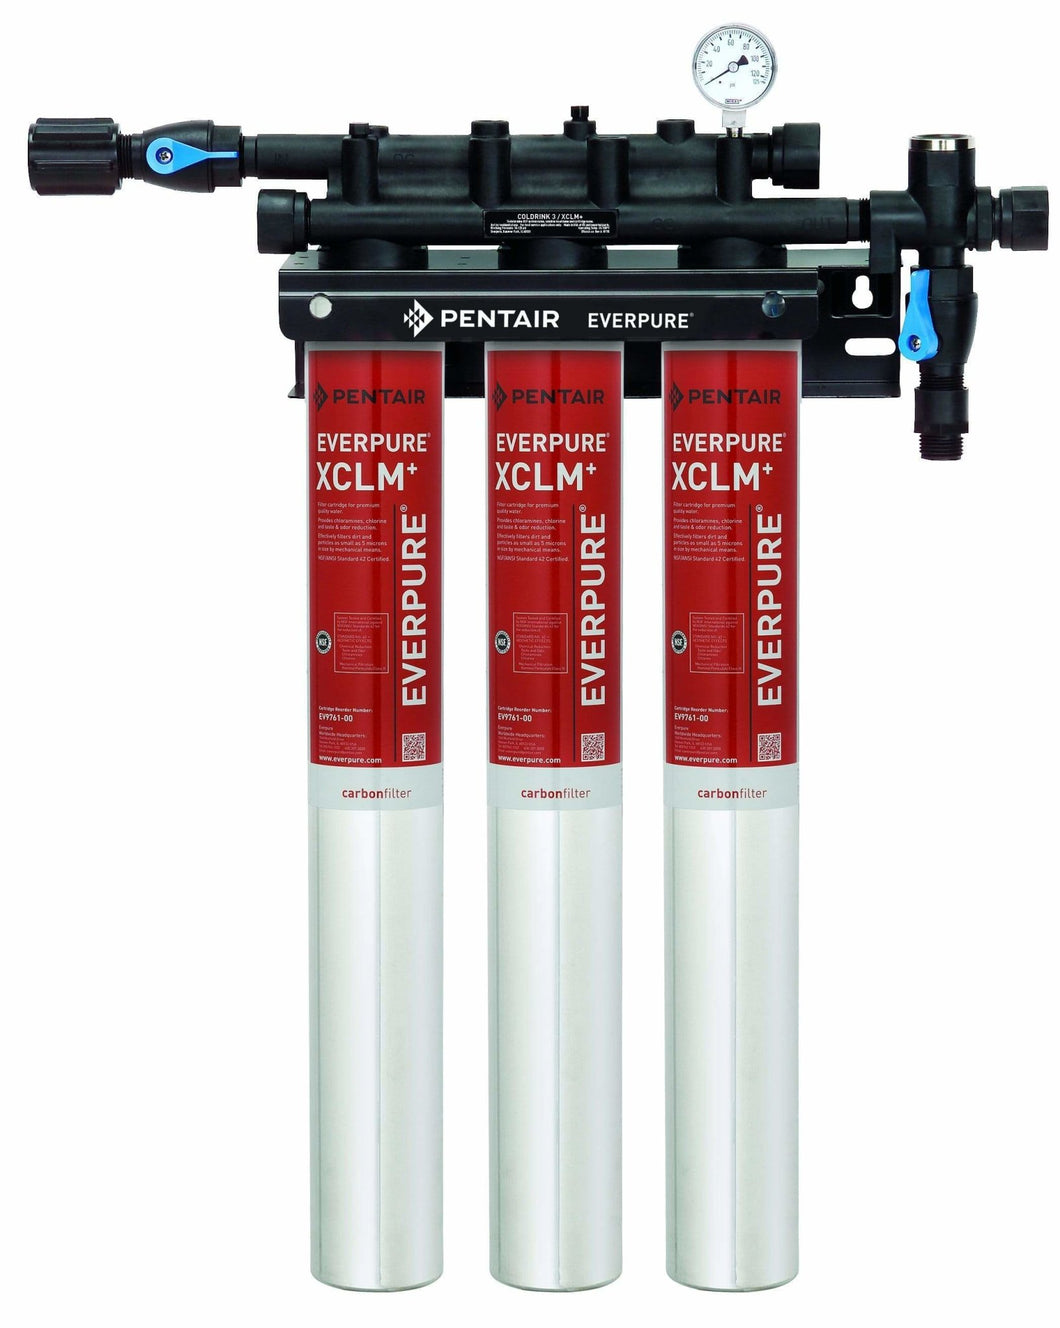 Everpure QC7i Triple XCLM+ Water Filter System EV9761-13 - Efilters.net